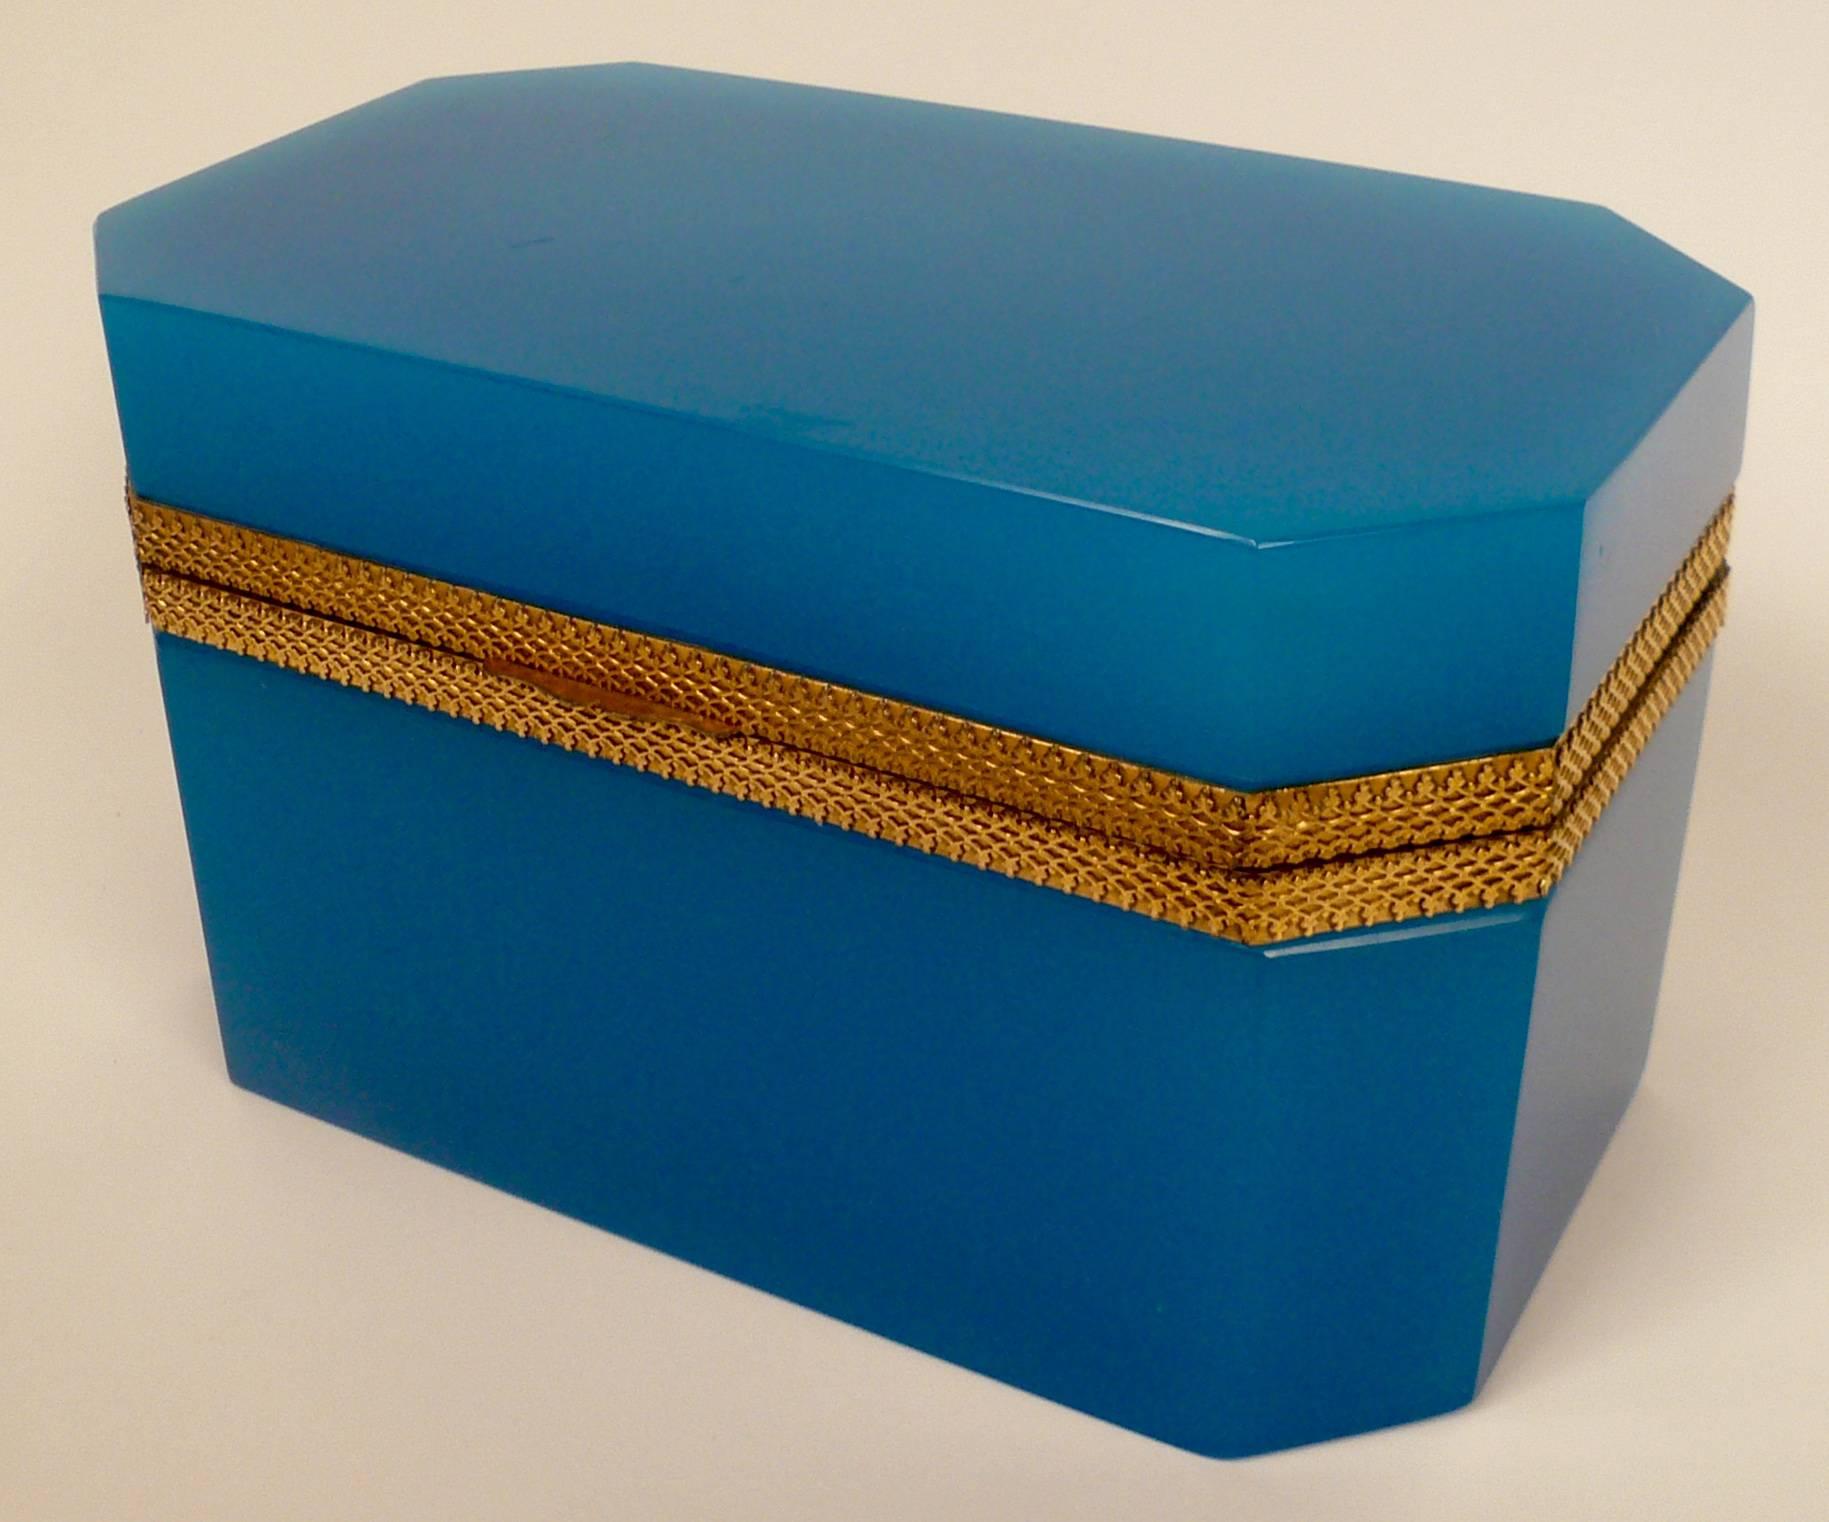 This large box, or casket in blue opaline glass is mounted in gilt bronze.